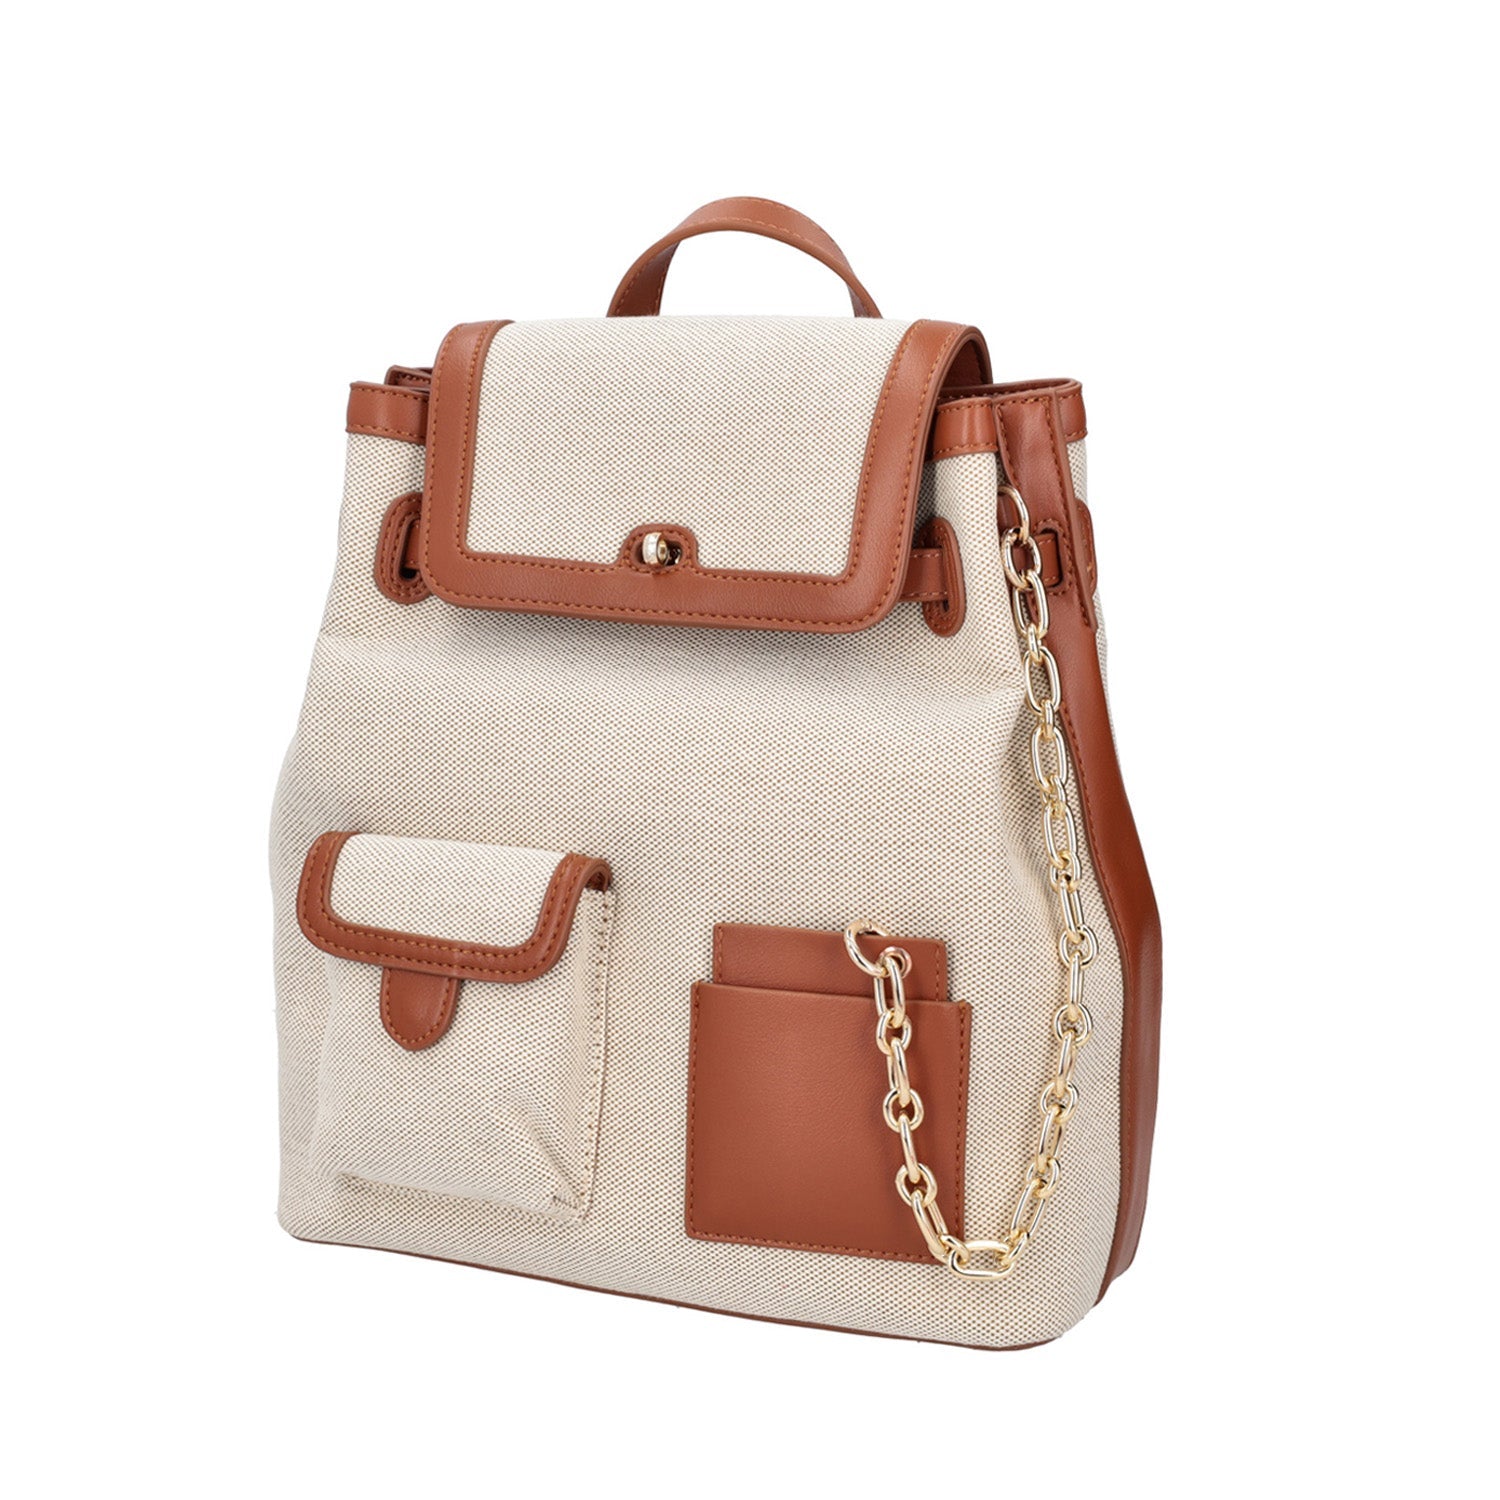 TAN FIORDALISO BACKPACK WITH CONTRAST PROFILES